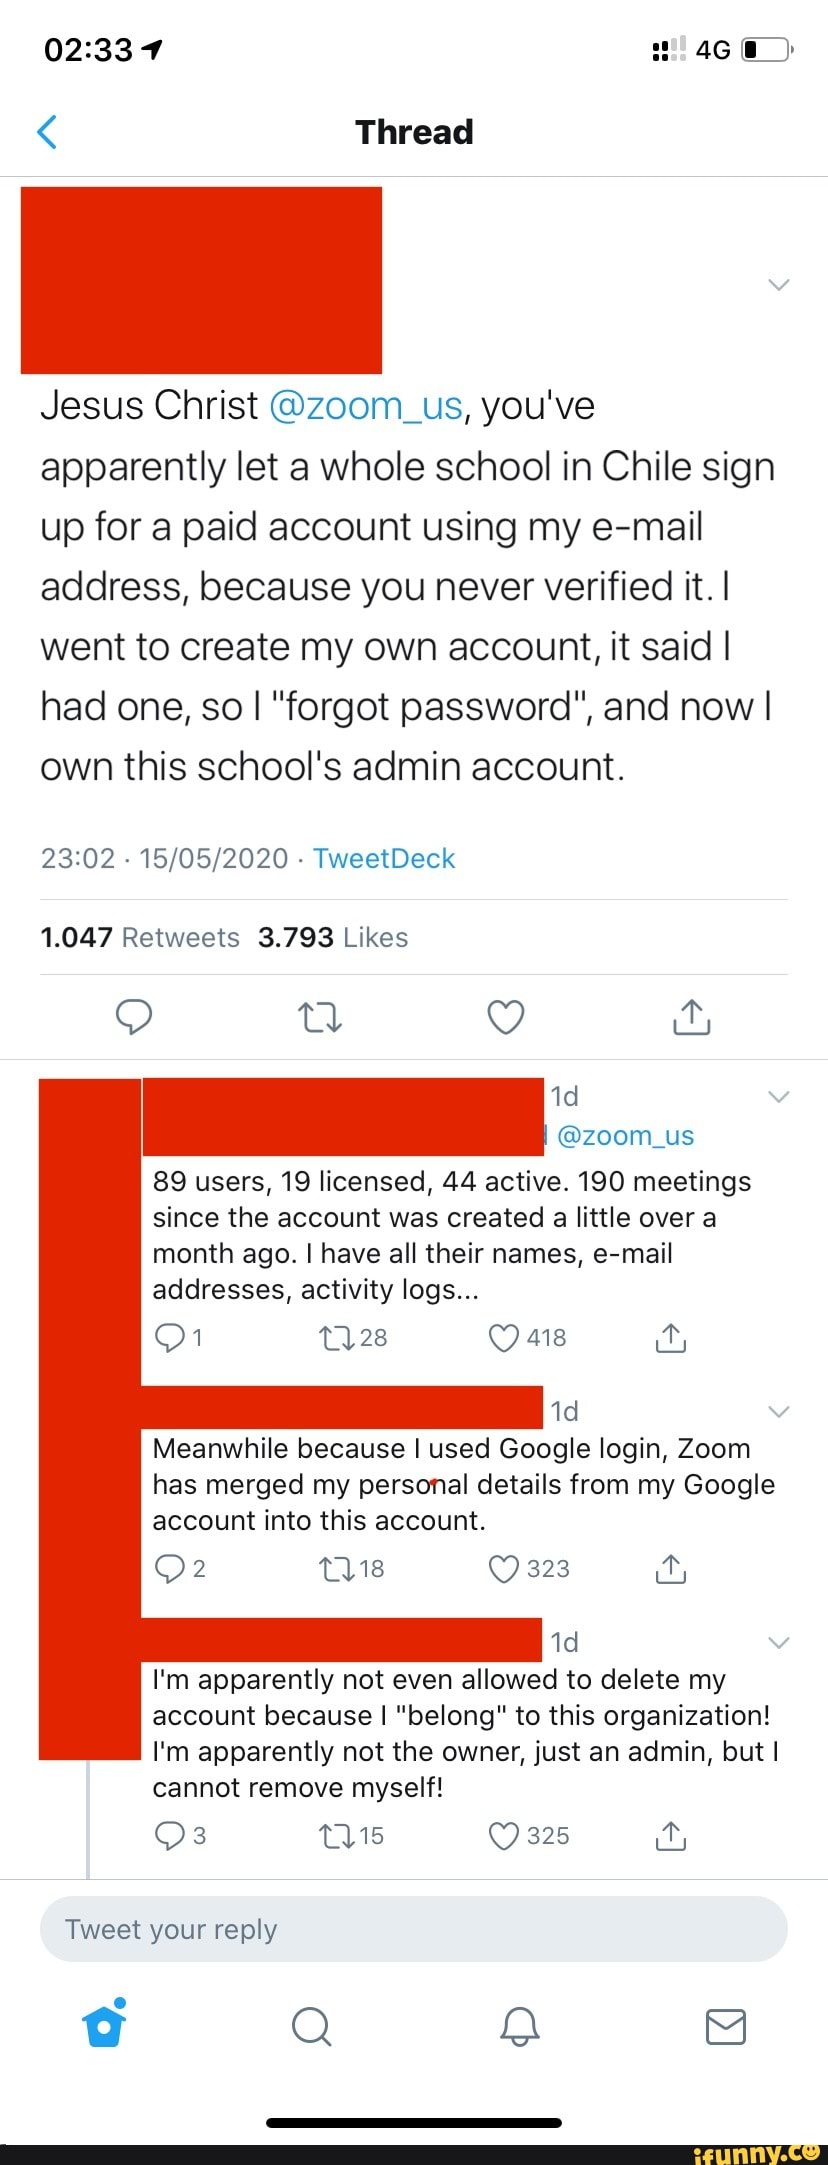 is not a user in your zoom account